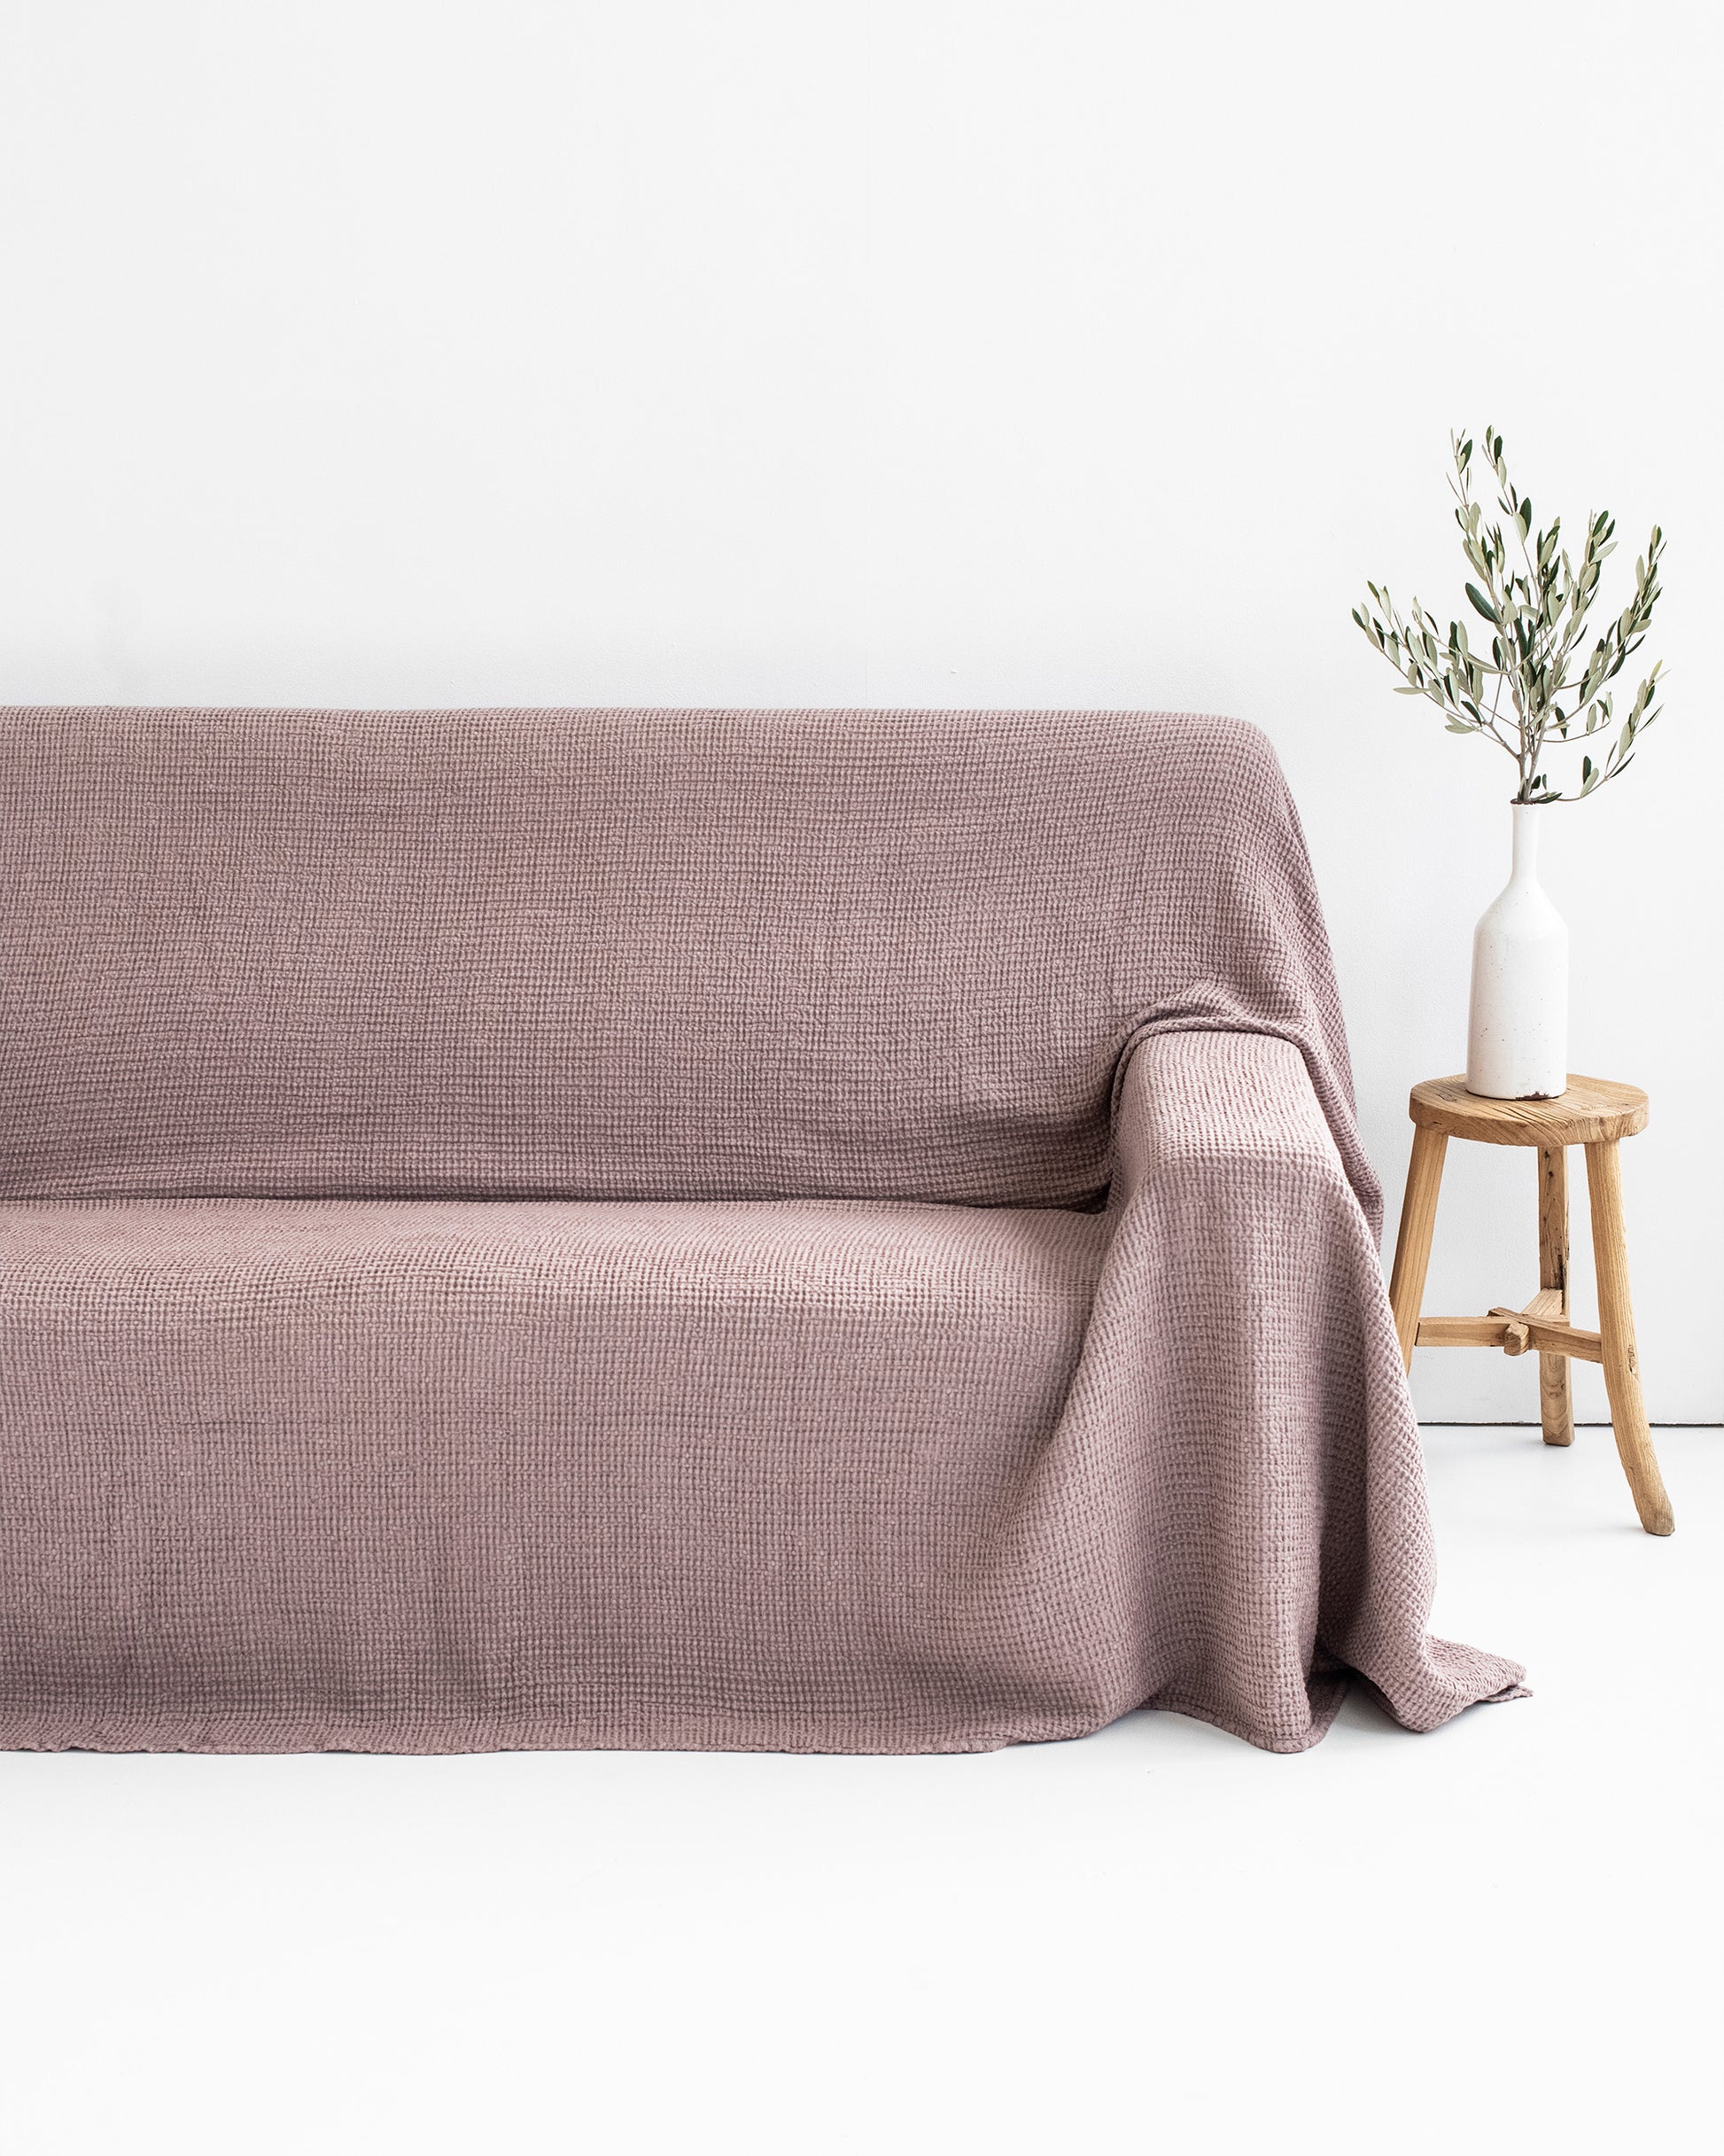 Waffle linen couch cover in Woodrose - MagicLinen